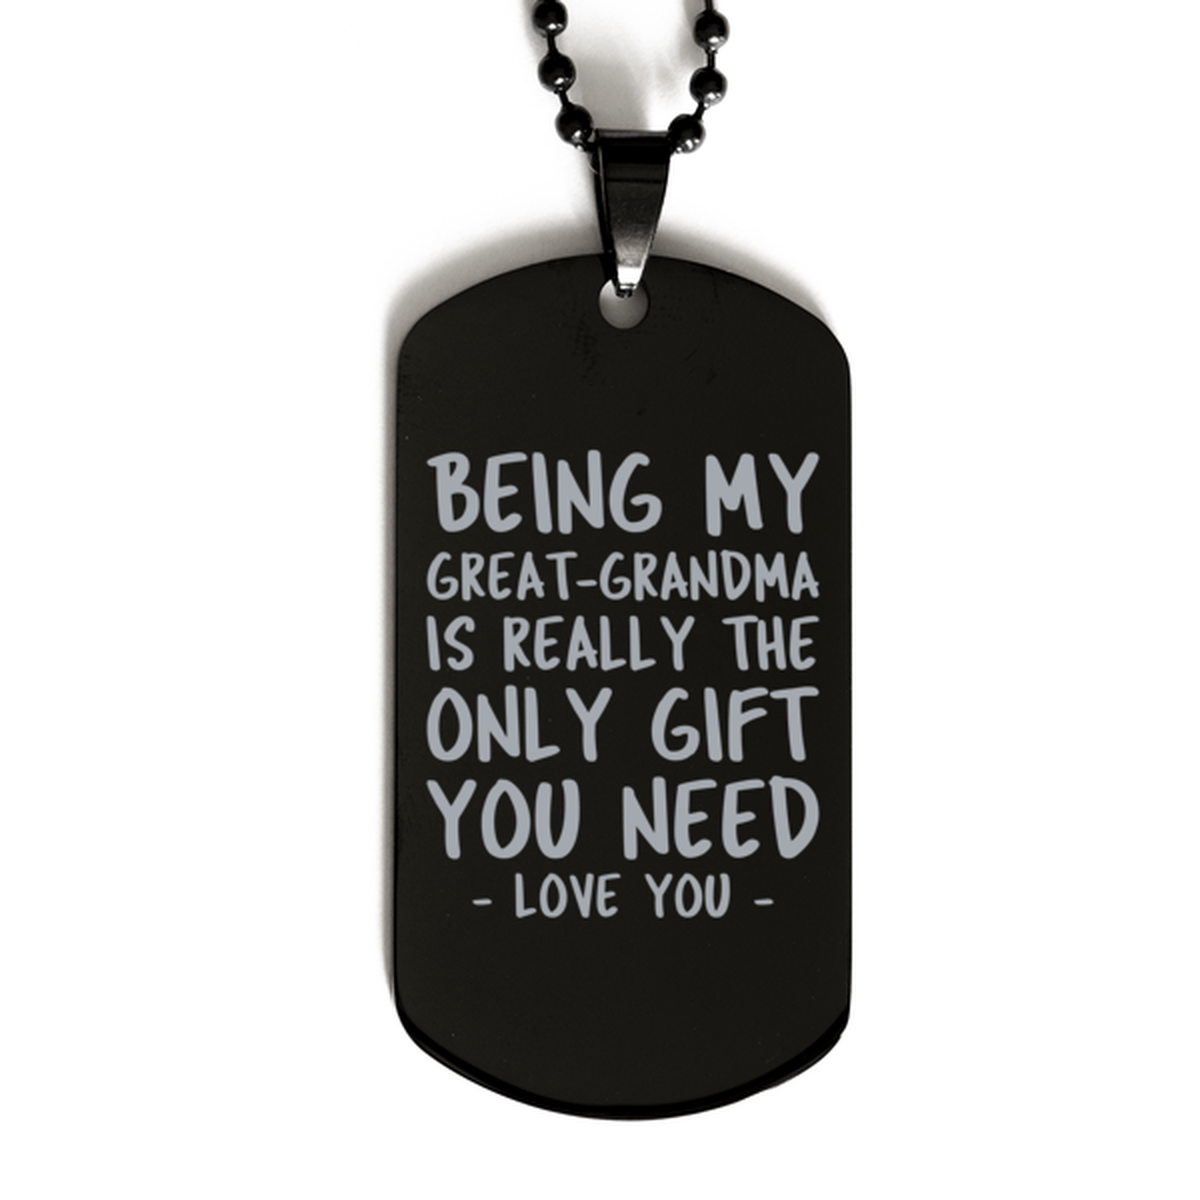 Funny Great-grandma Black Dog Tag Necklace, Being My Great-grandma Is Really the Only Gift You Need, Best Birthday Gifts for Great-grandma